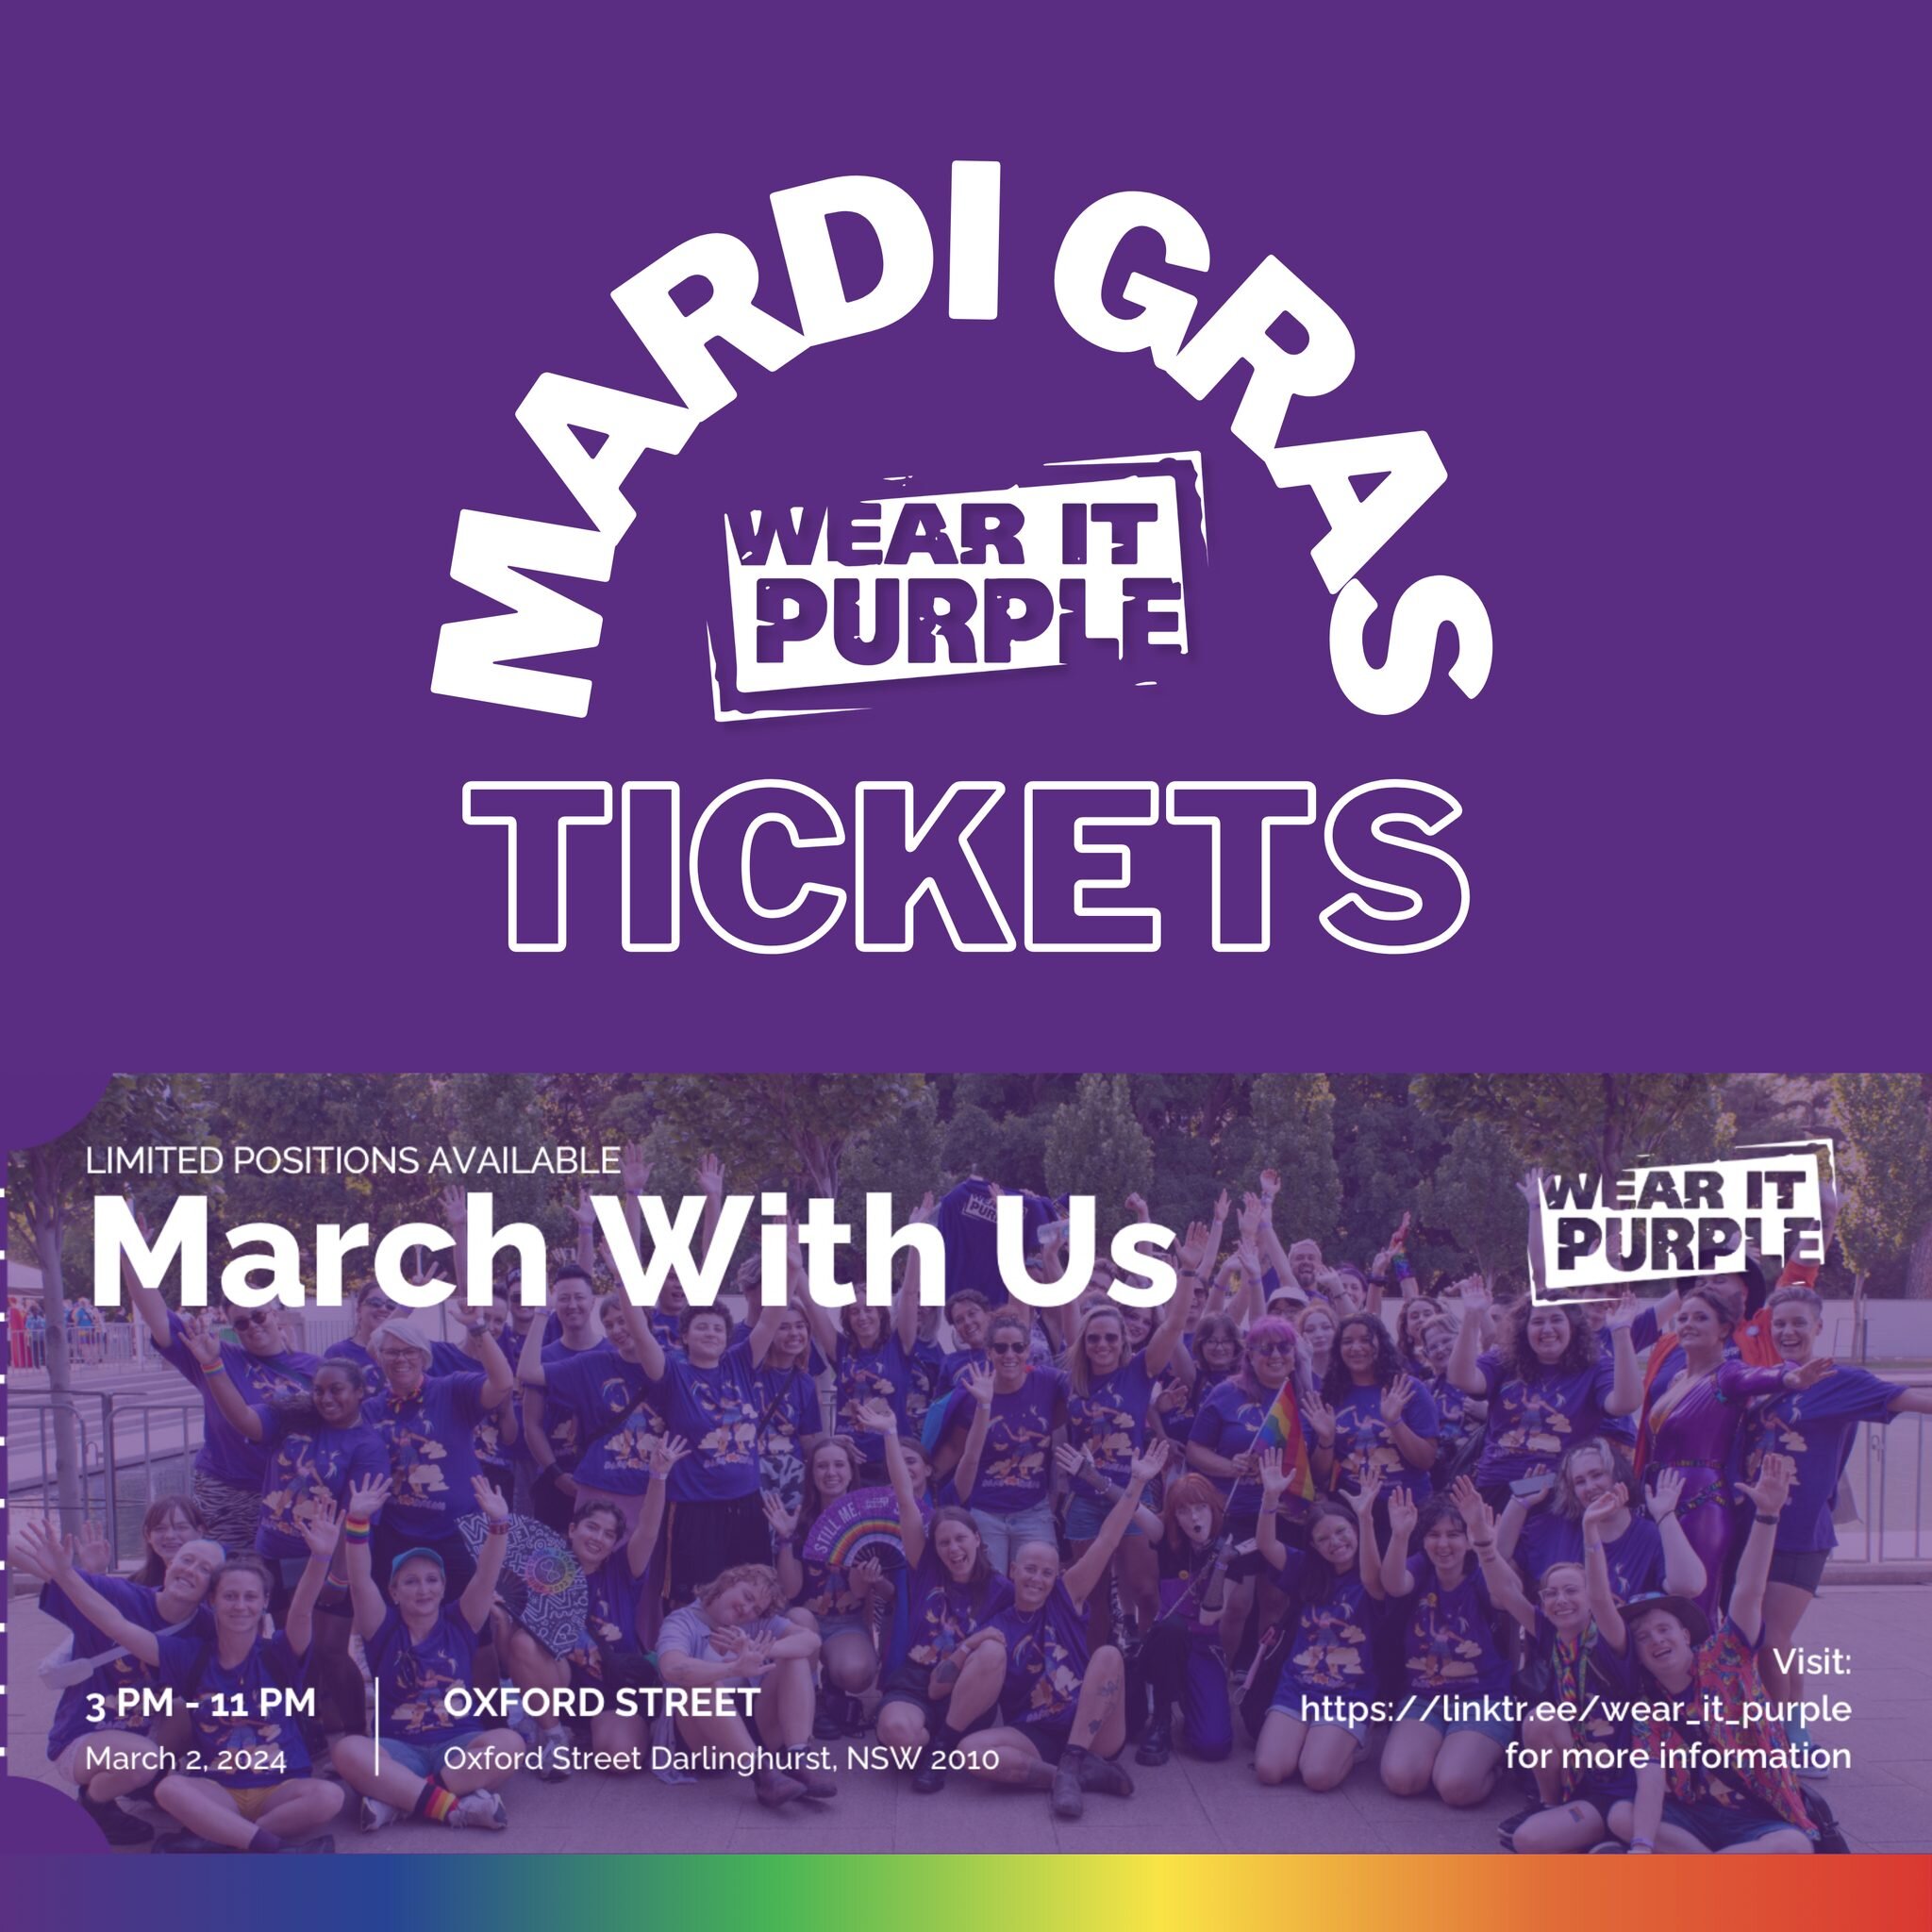 💜MARDI GRAS TICKETS ARE AVAILABLE NOW, LINK IN BIO💜
Honour the Legacy of Love with Wear It Purple this Mardi Gras!

On Saturday March 2nd 2024, Wear It Purple will be marching in the Sydney annual Mardi Gras on Oxford Street with the theme Legacy o